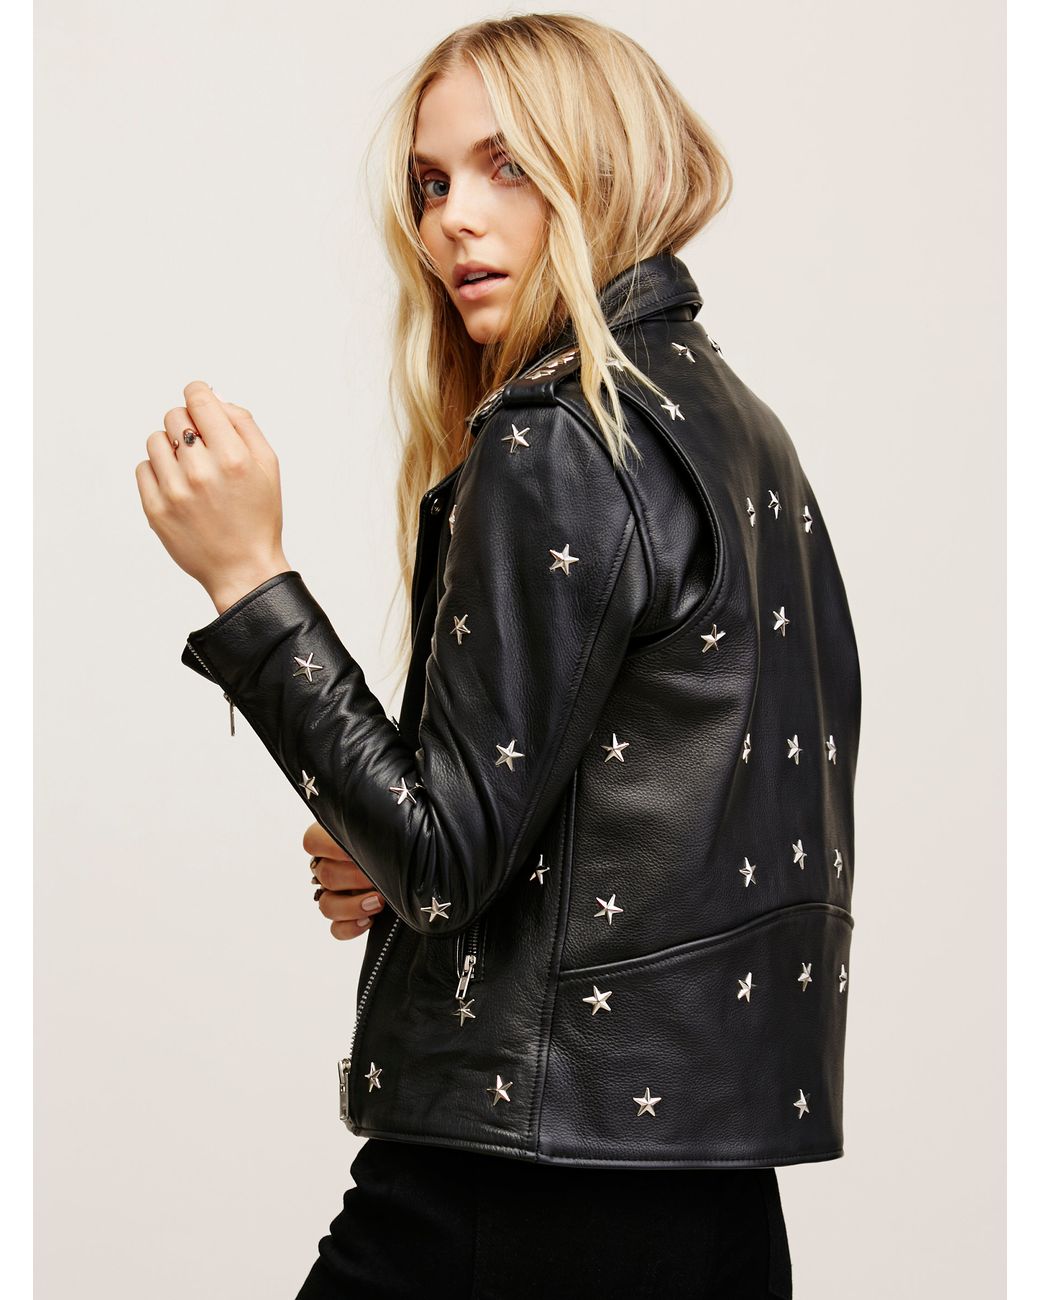 Free People Star Studded Leather Jacket in Black | Lyst